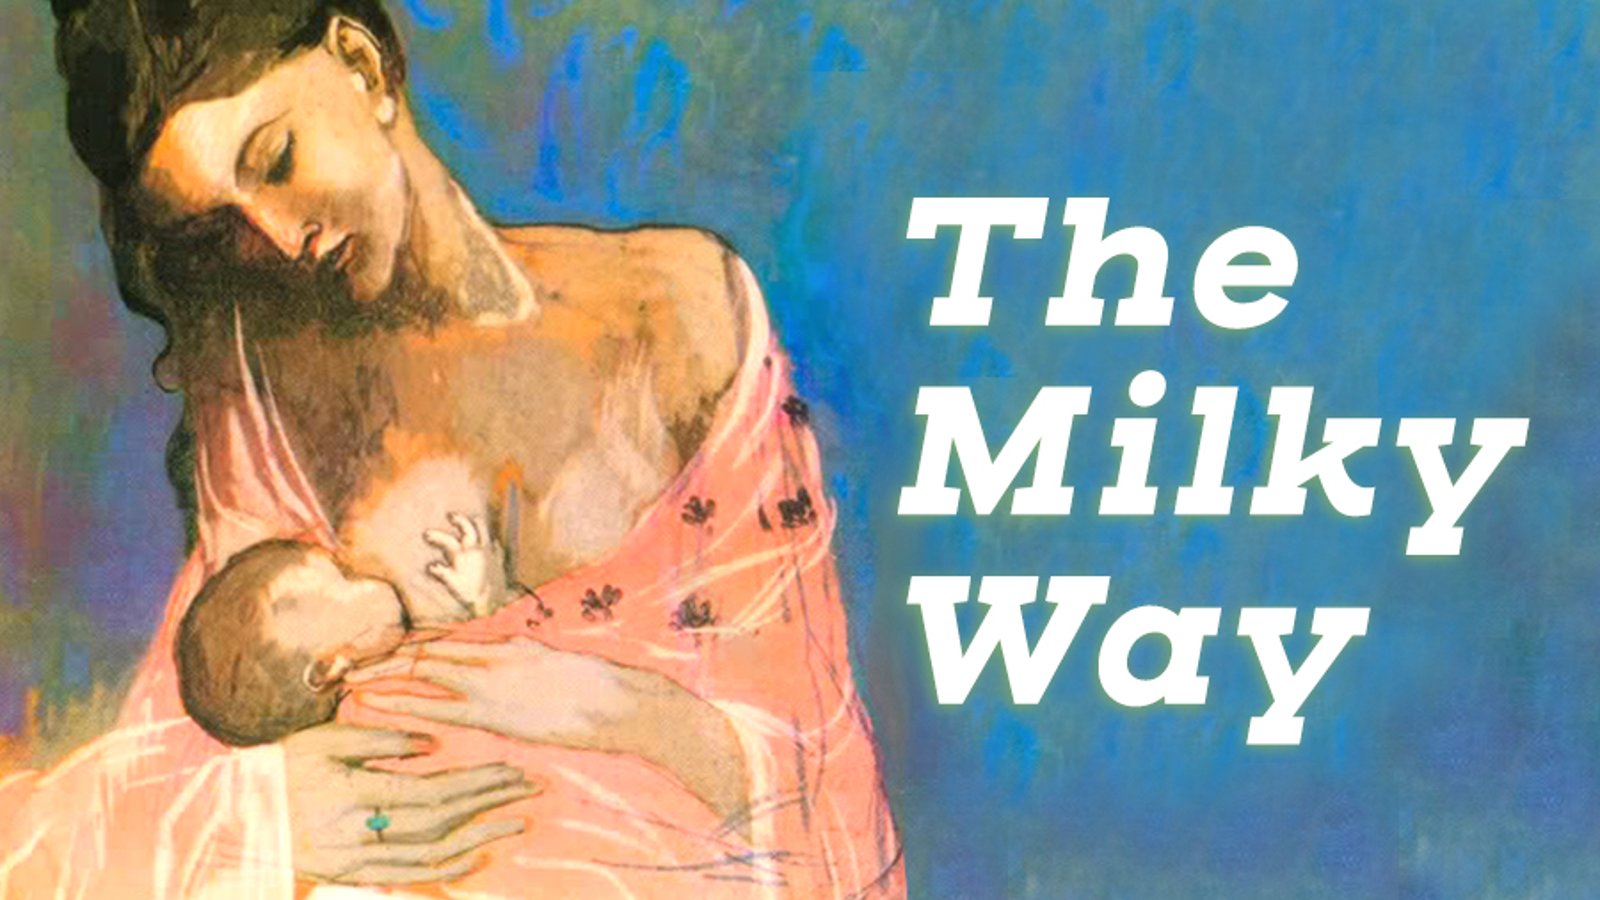 The Milky Way - The Case for Breastfeeding